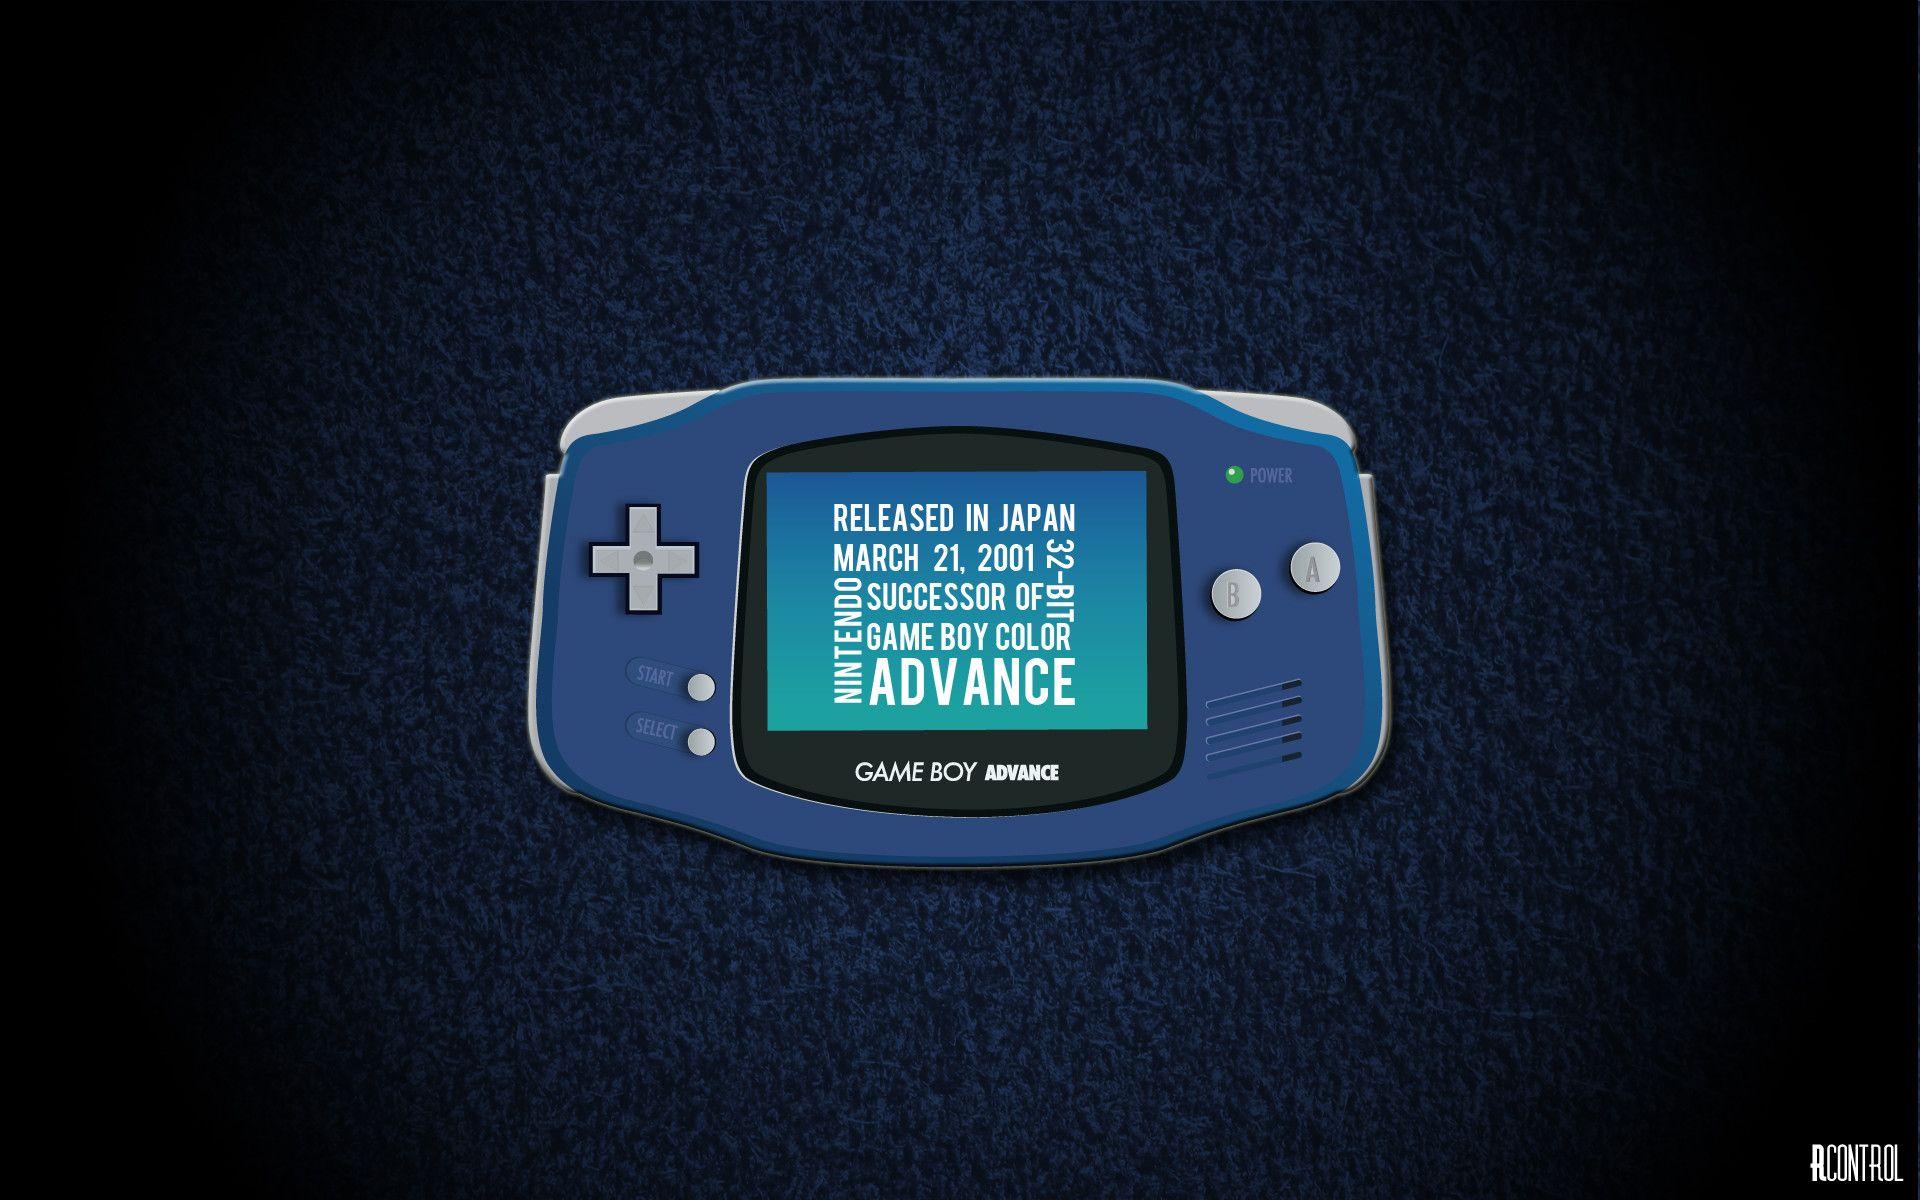 Wallpaper  1920x1200 px GameBoy Advance GameBoy Advance SP GameBoy Color  GameBoy Micro Nintendo DS 1920x1200  wallup  1335311  HD Wallpapers   WallHere